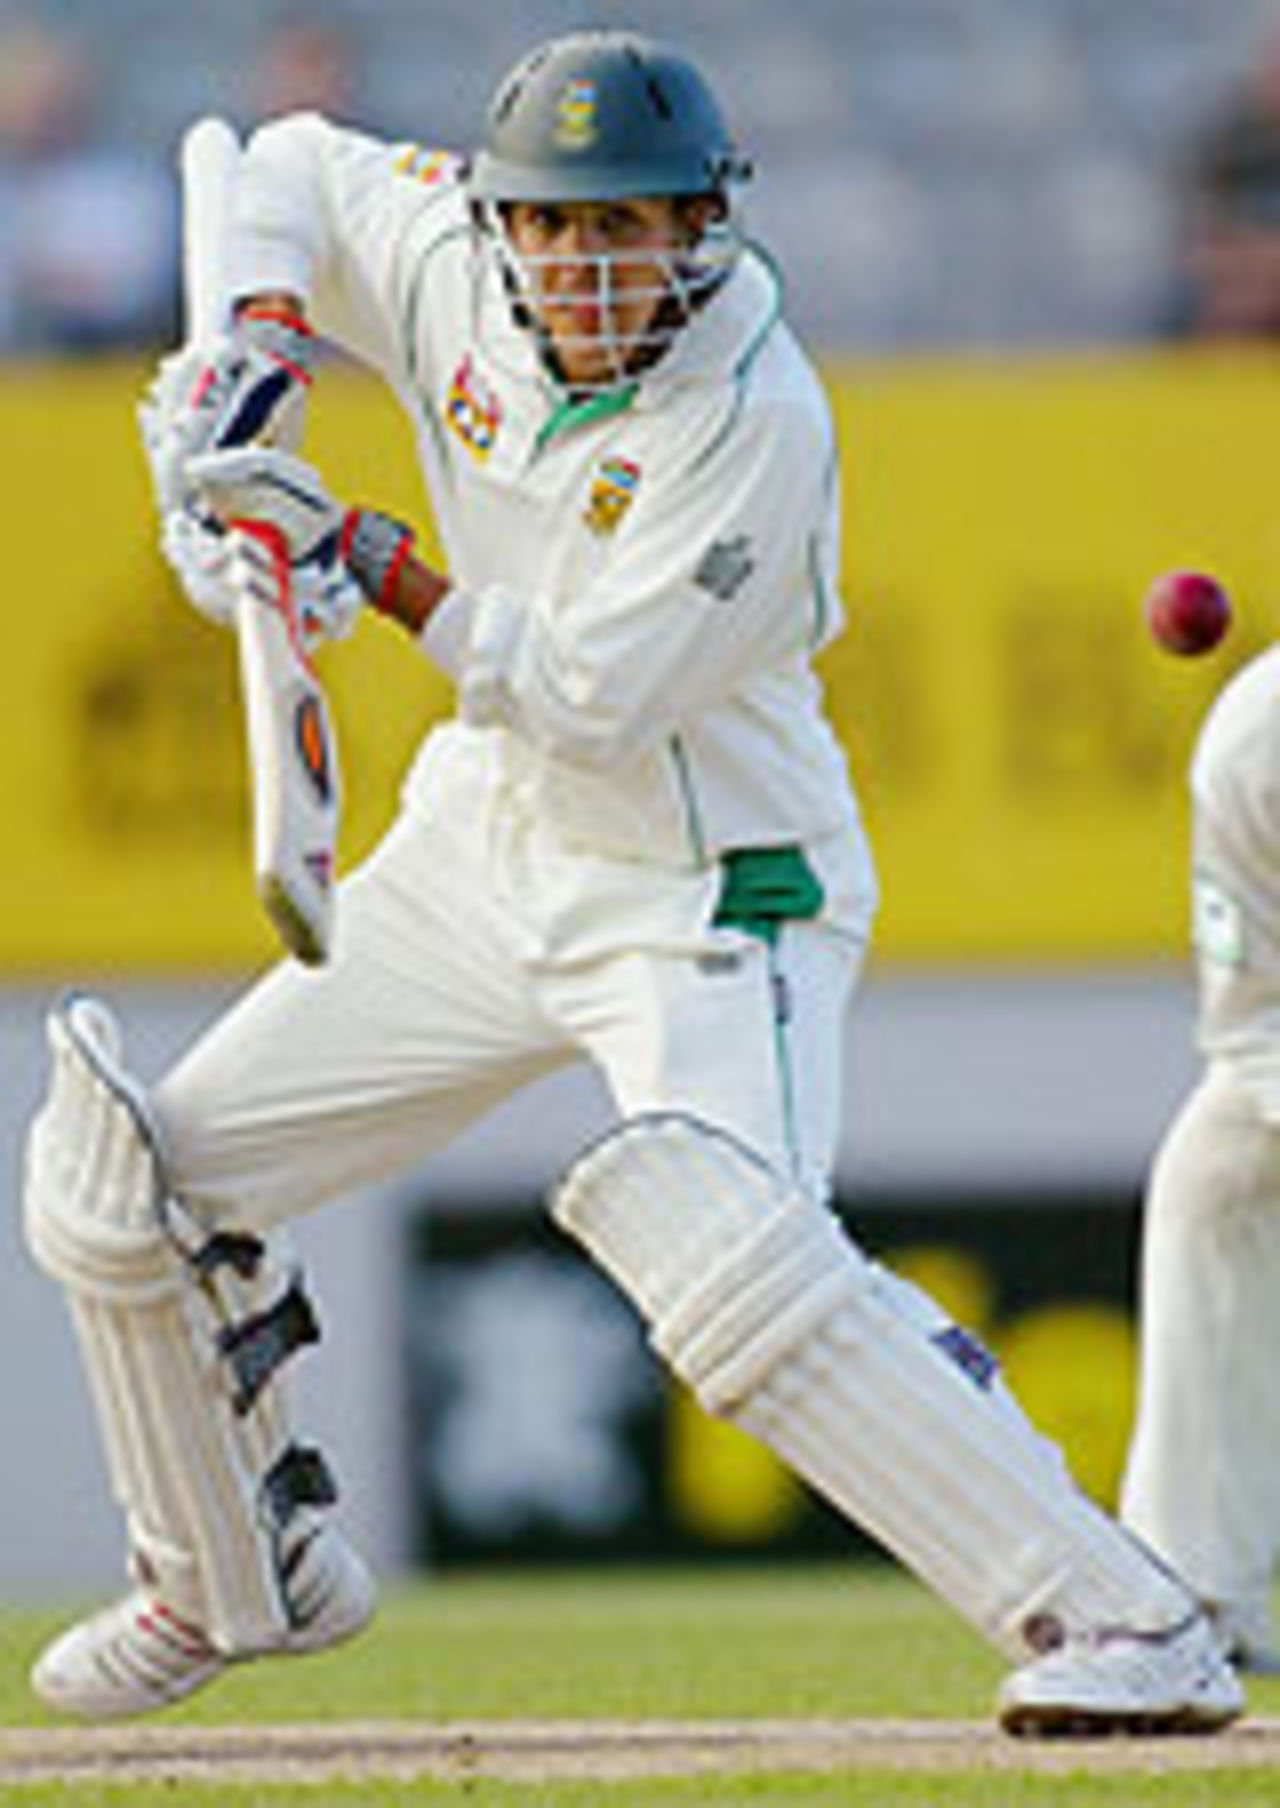 Jacques Rudolph strikes out during his century, New Zealand v South Africa, 2nd test, Auckland, 4th day, March 21, 2004